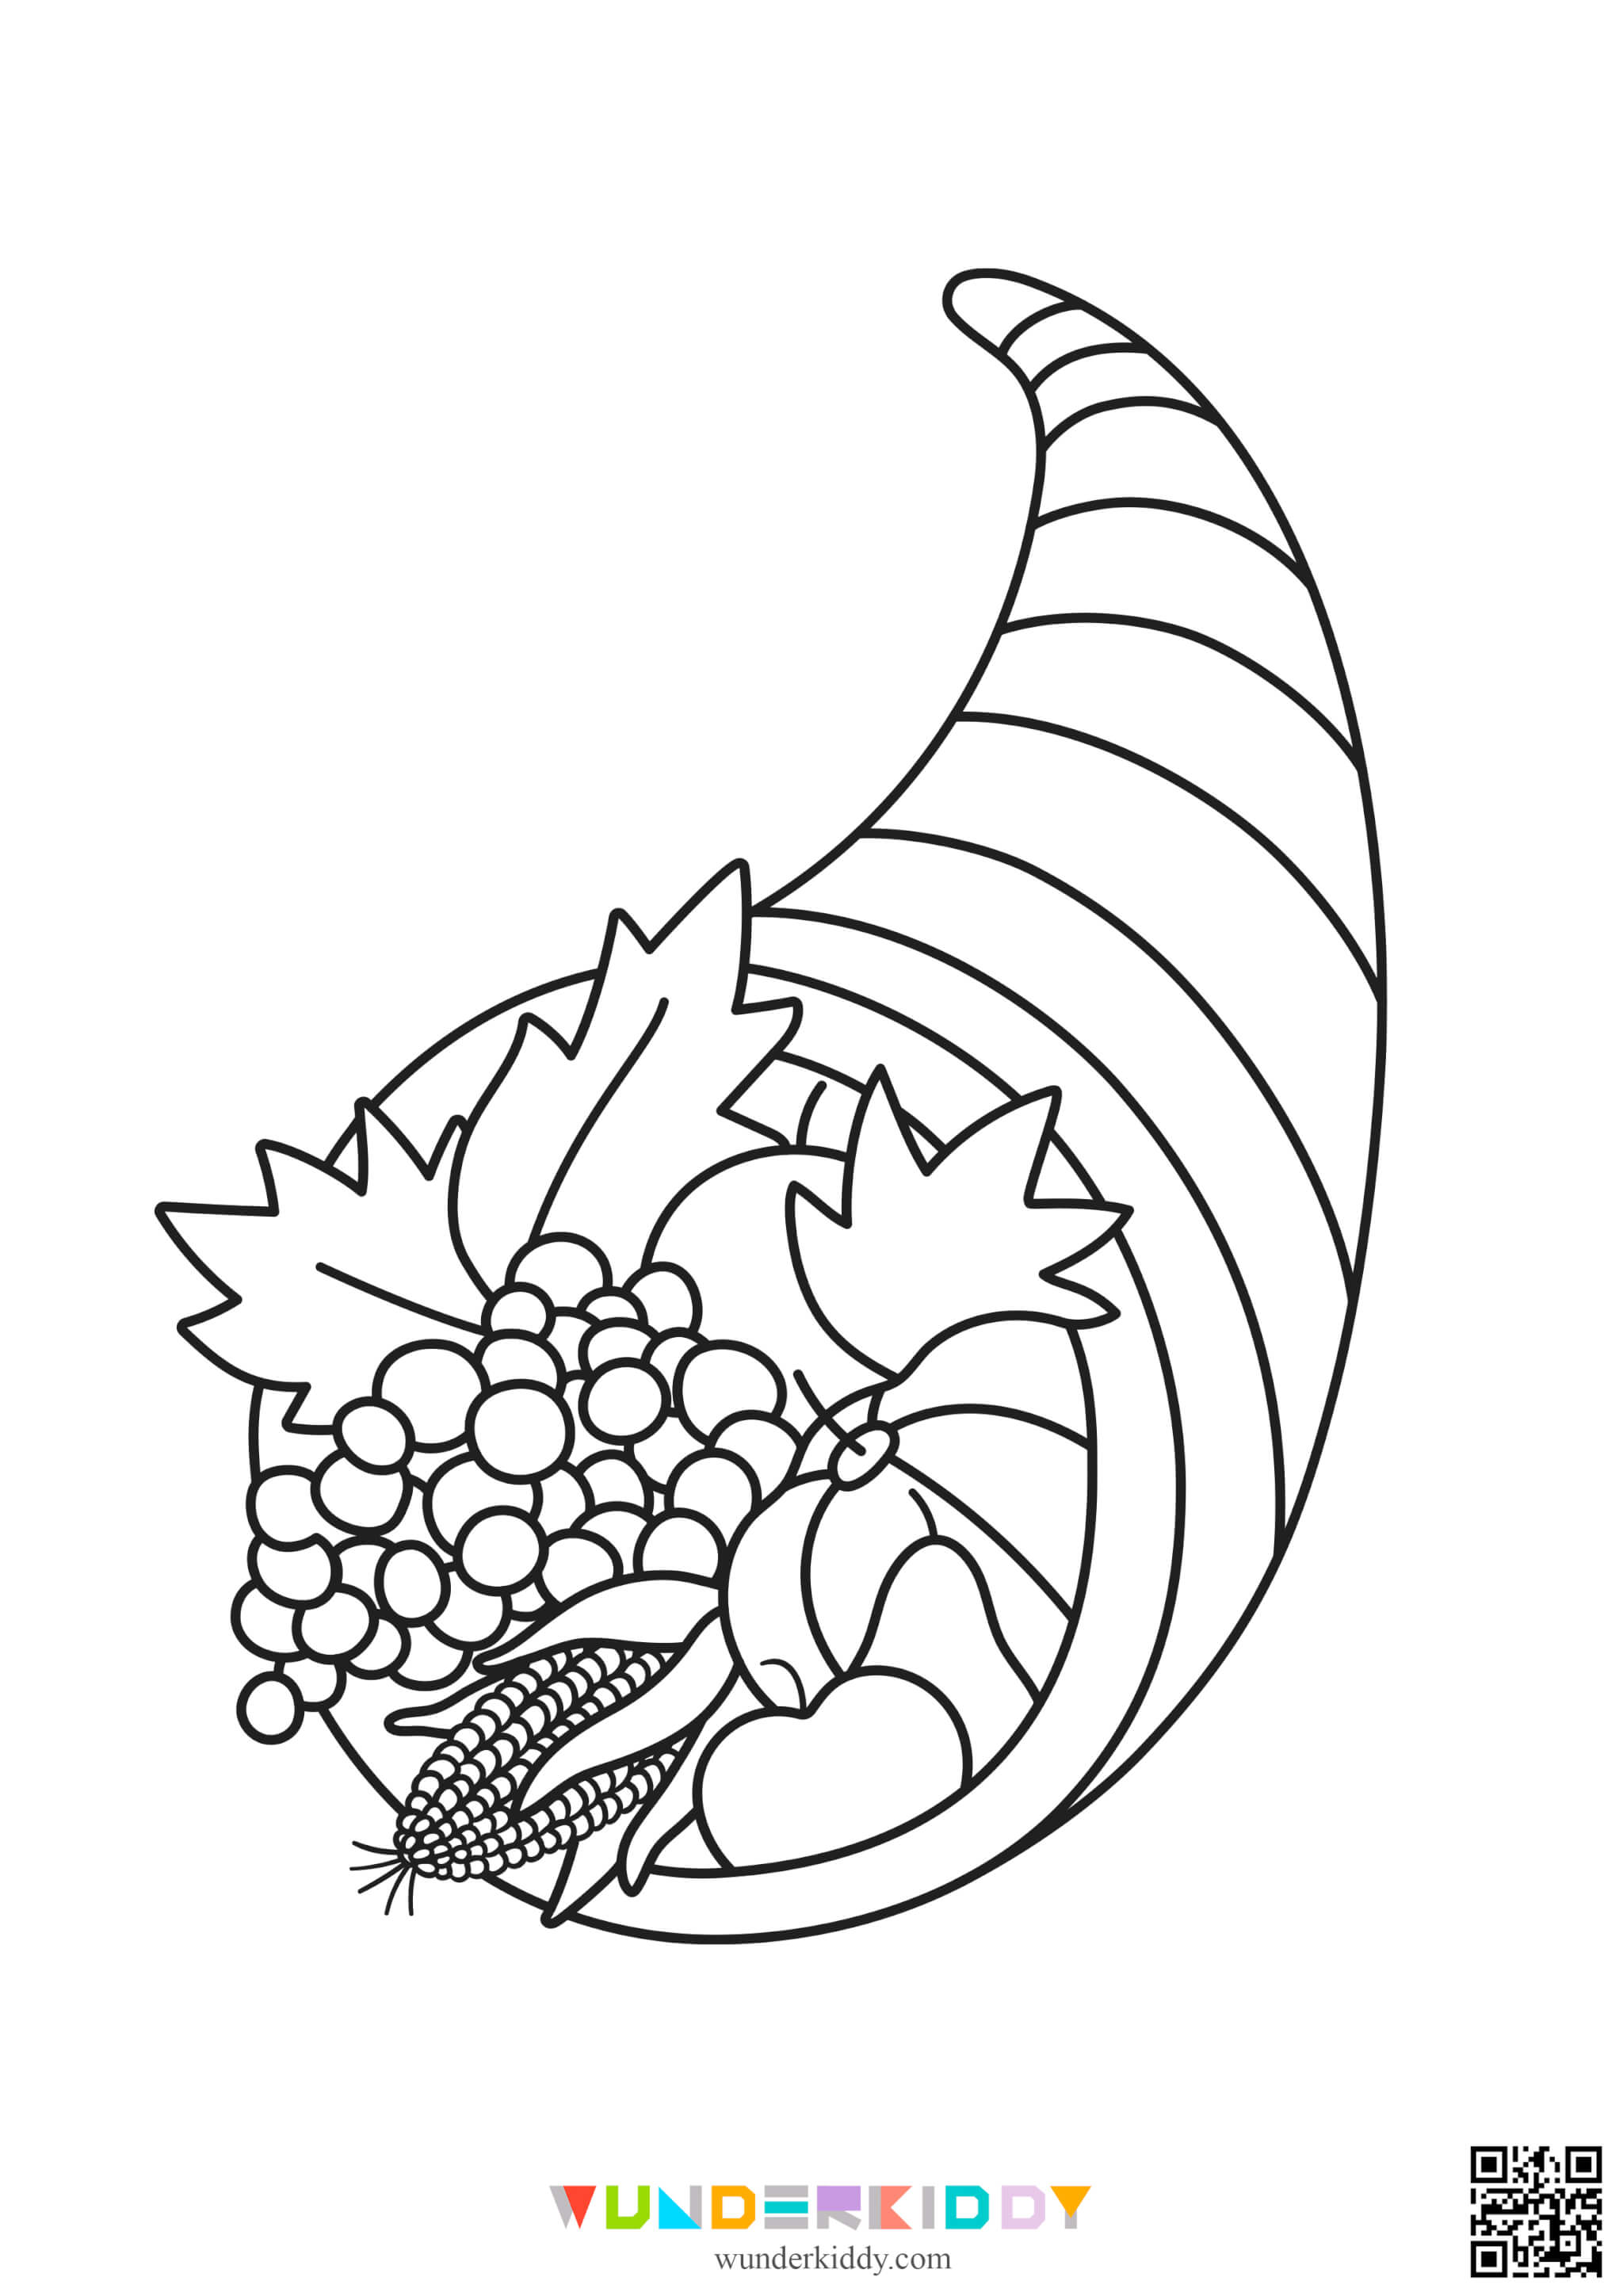 Fall Coloring Pages - Image 2